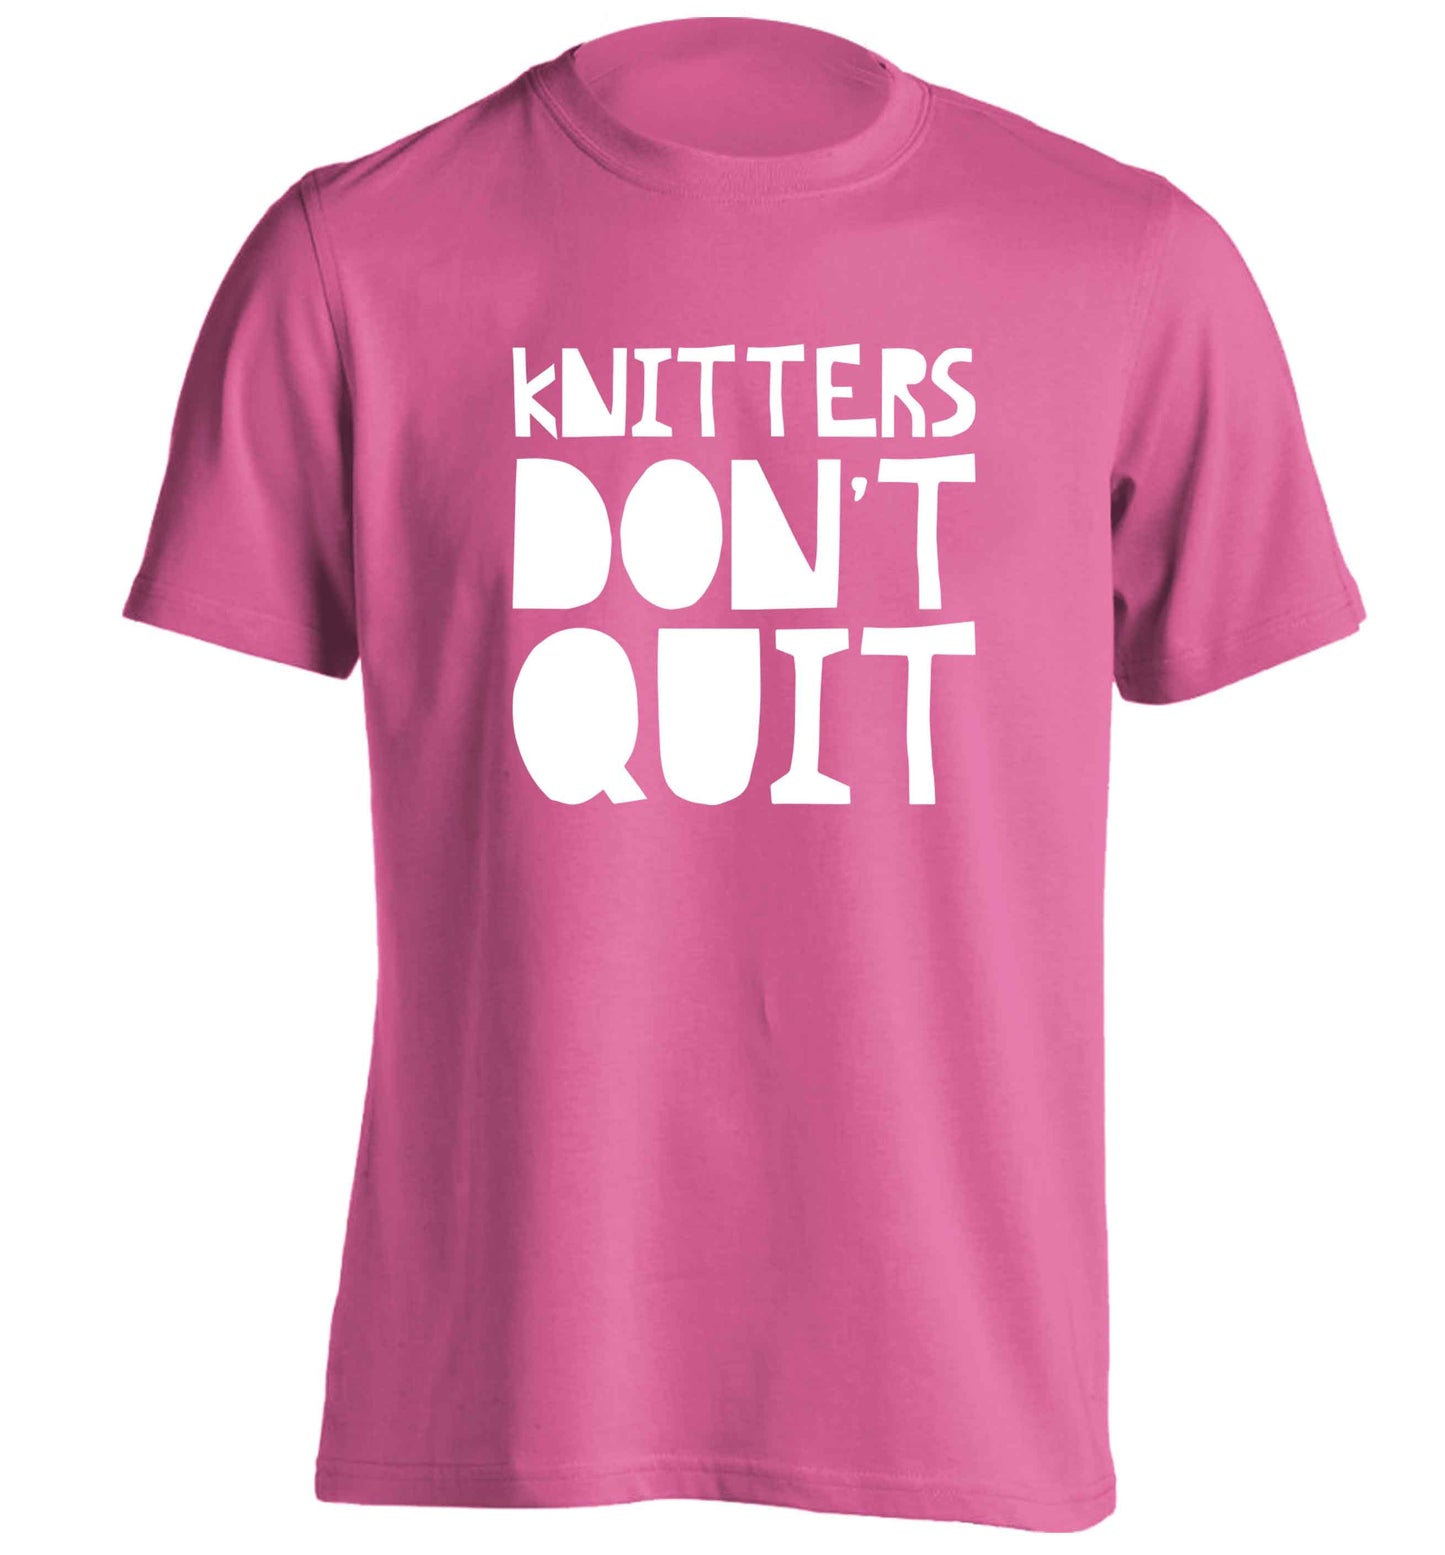 Knitters don't quit adults unisex pink Tshirt 2XL